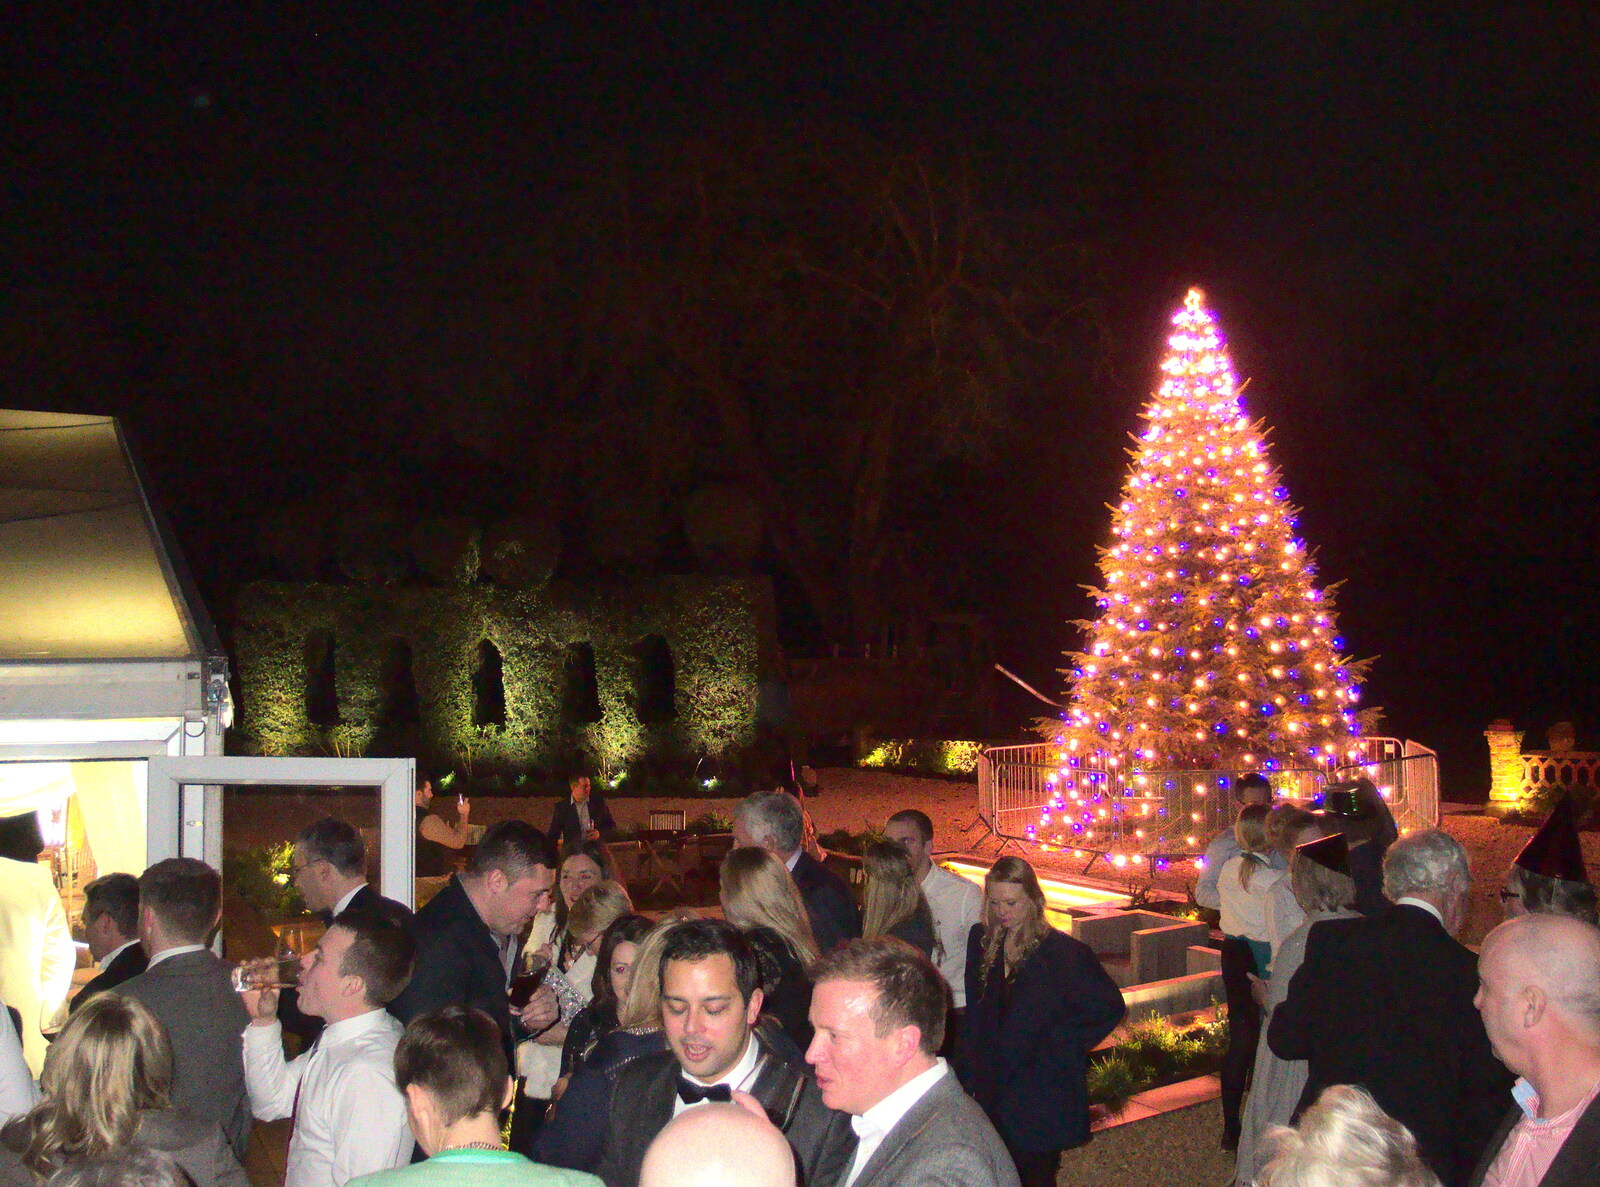 Crowds outside, and the Christmas tree from New Year's Eve at the Oaksmere, Brome, Suffolk - 31st December 2014